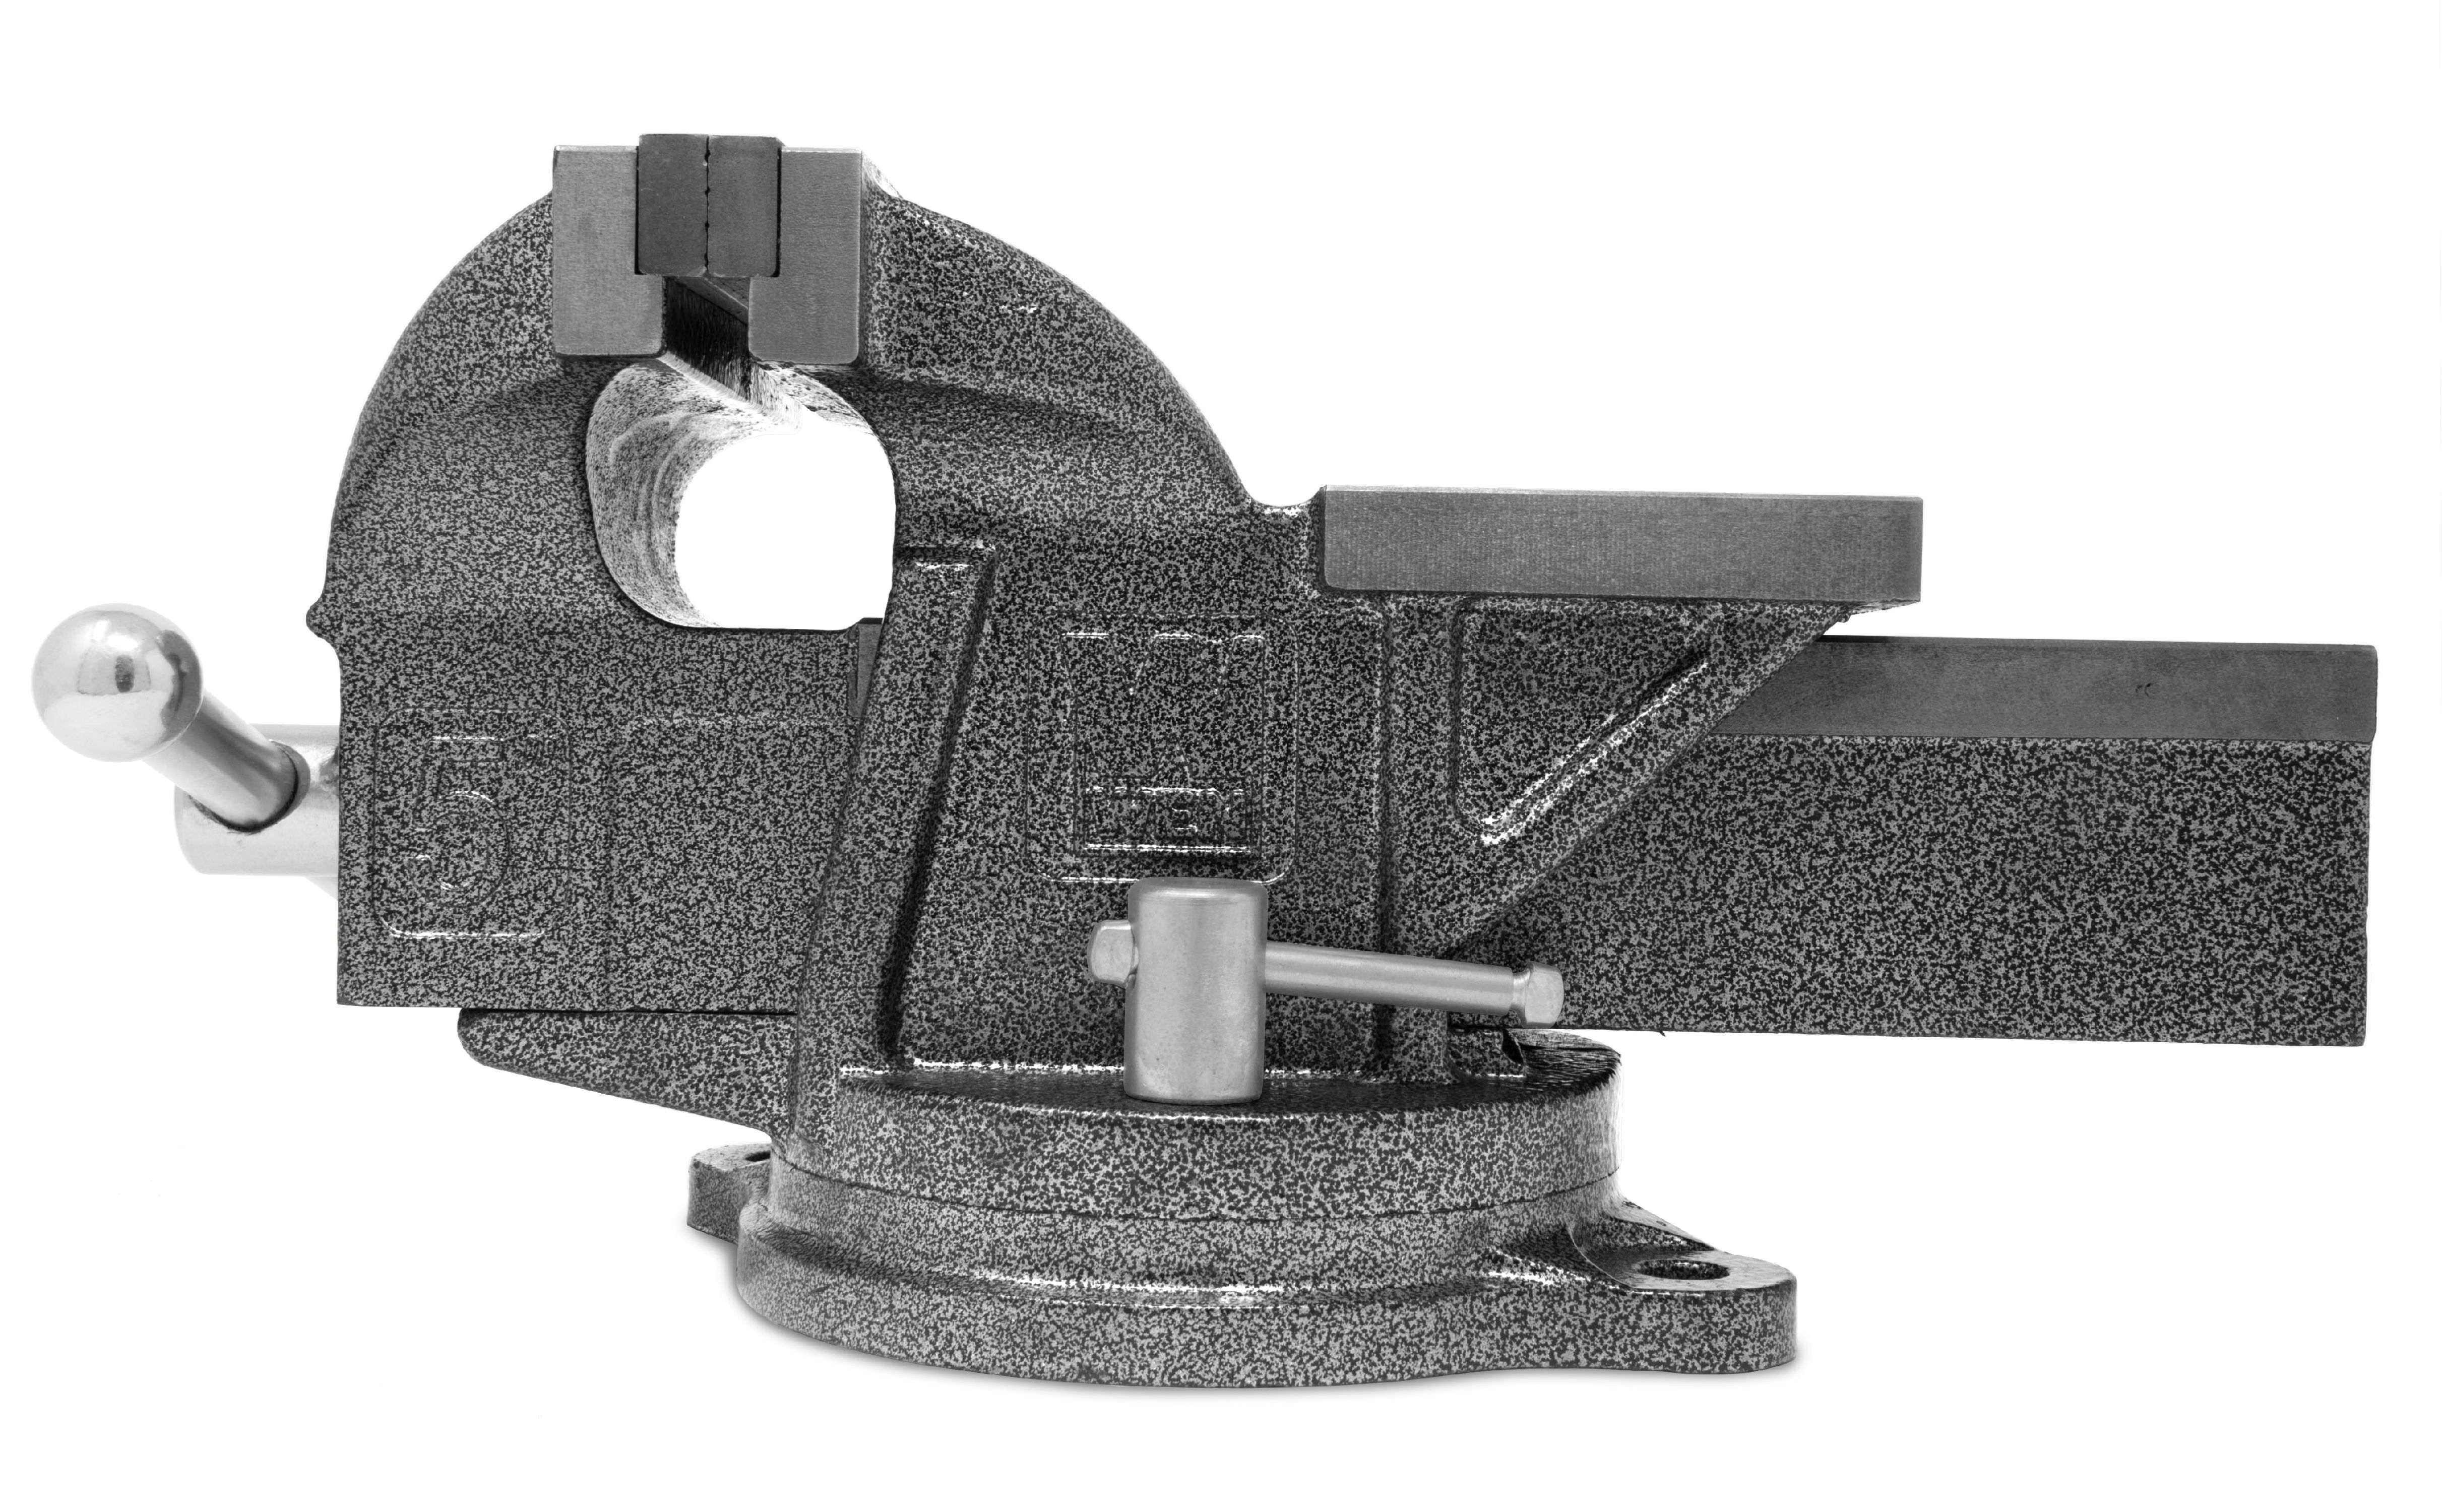 WEN Products 5-Inch Heavy Duty Cast Iron Bench Vise with Swivel Base - image 3 of 4